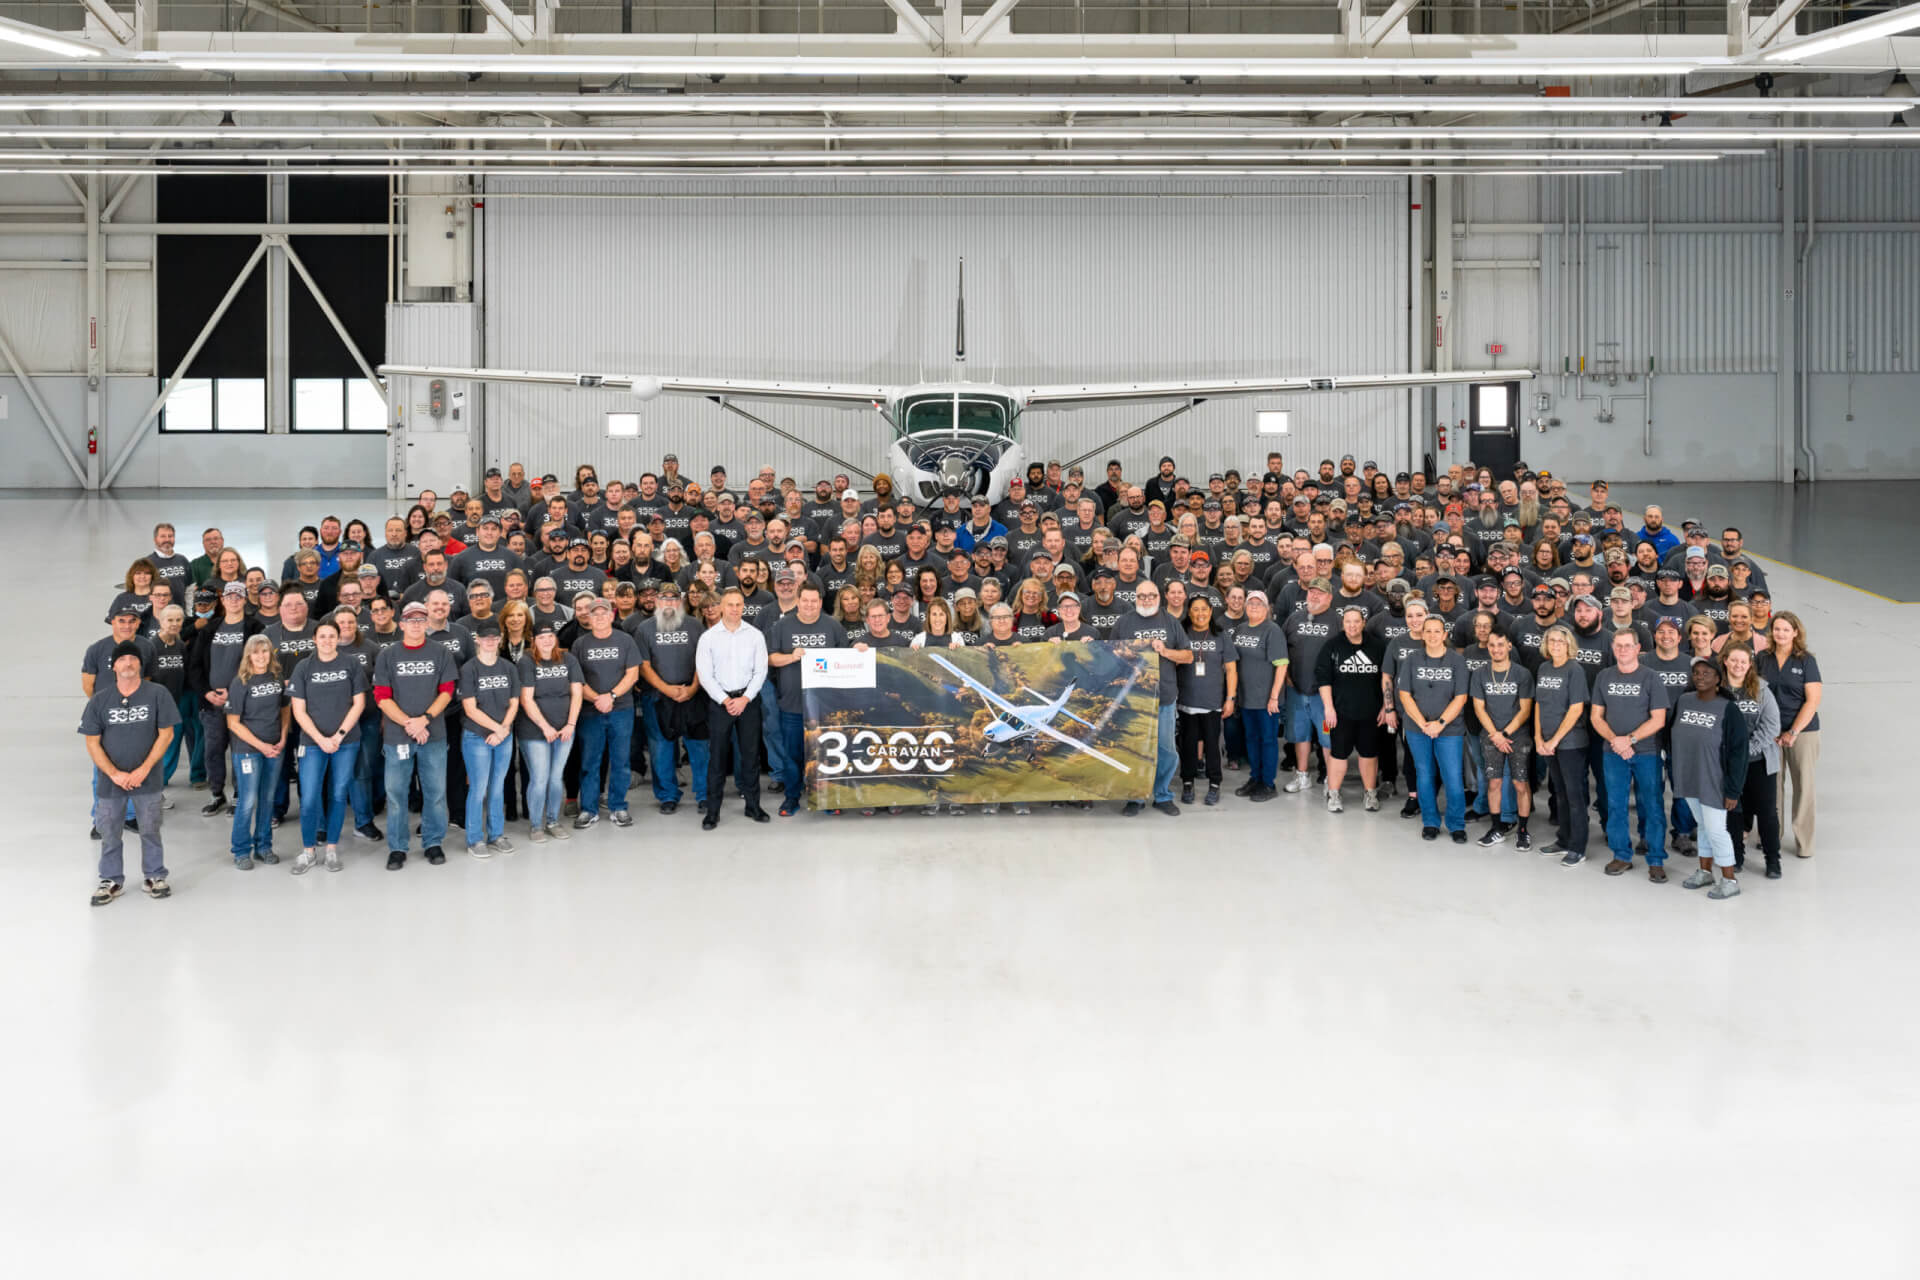 Textron Aviation delivers 3,000th Cessna Caravan family aircraft